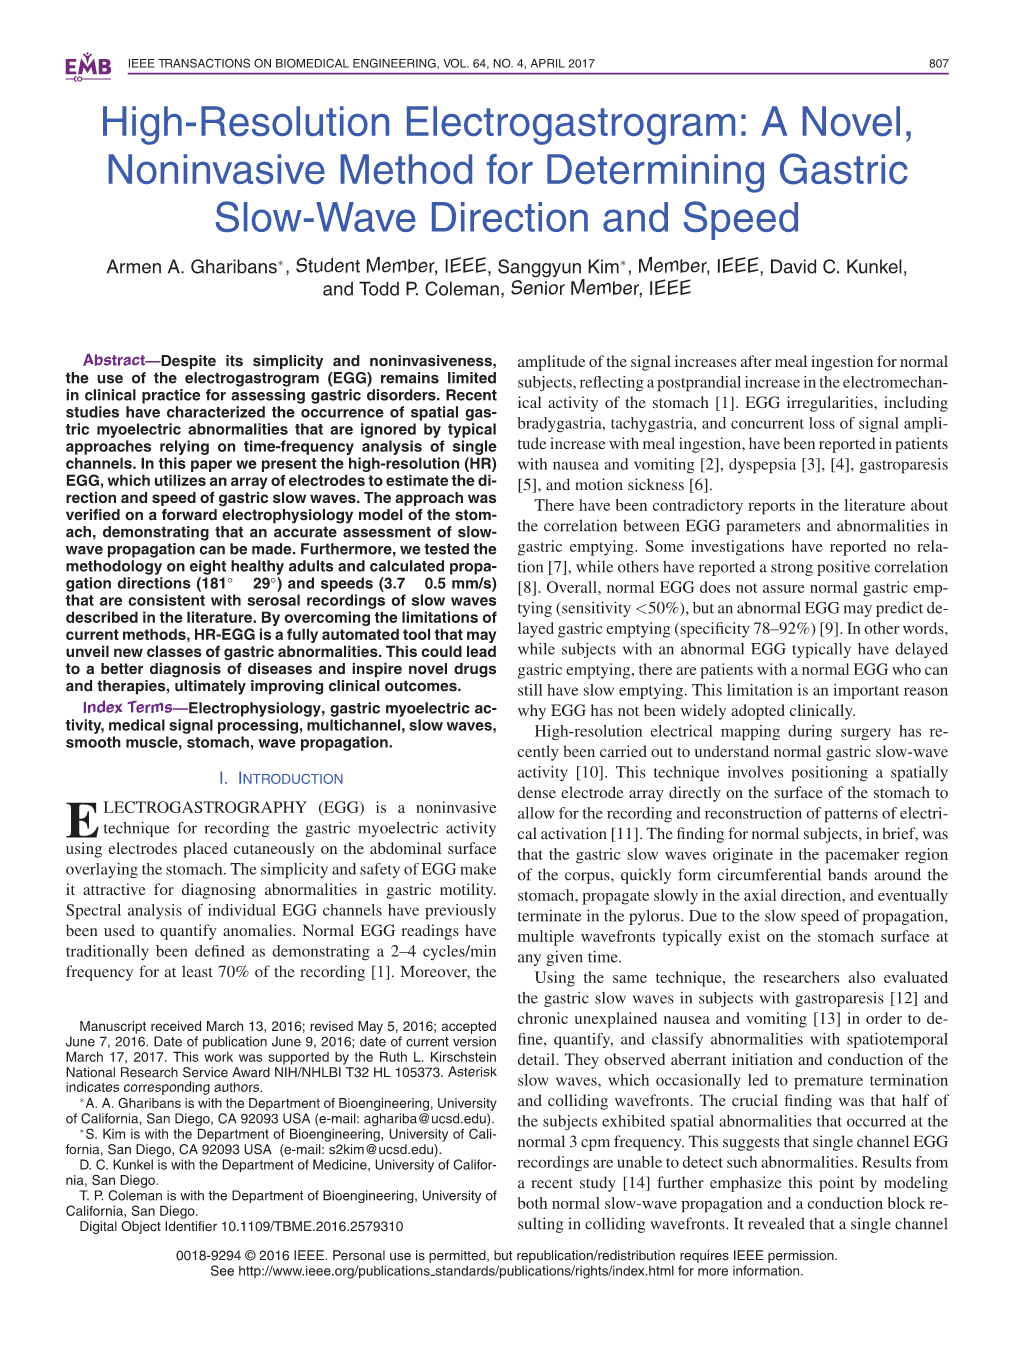 High-Resolution Electrogastrogram: a Novel, Noninvasive Method for Determining Gastric Slow-Wave Direction and Speed Armen A